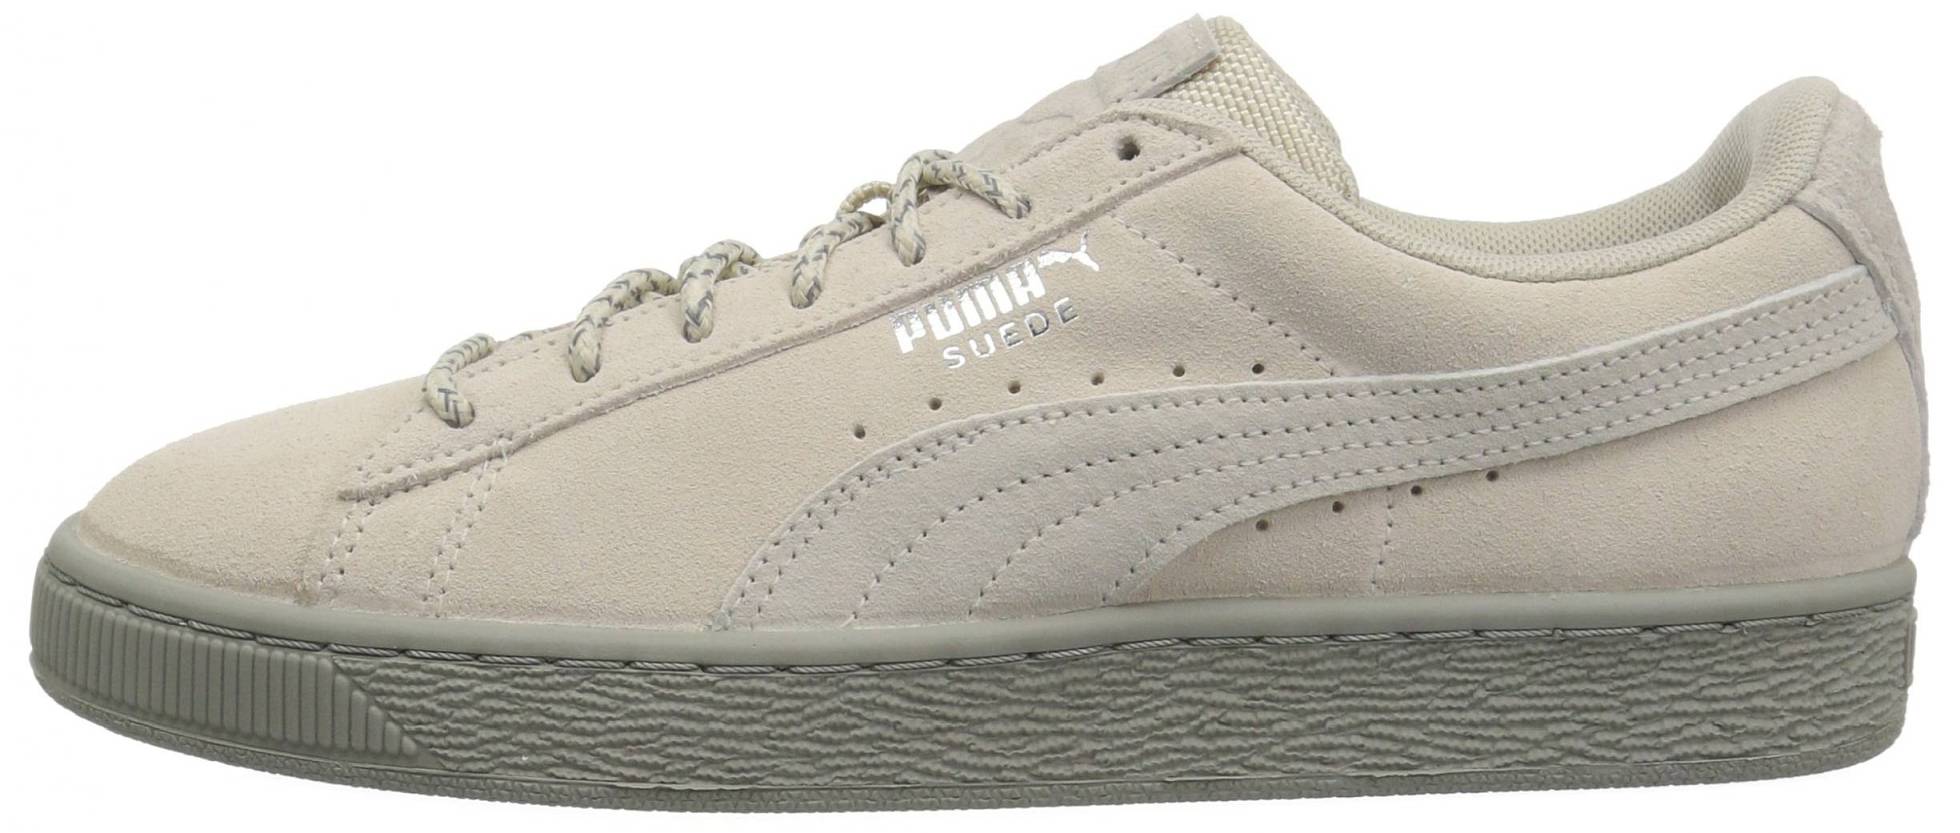 Puma Suede Classic Weatherproof – Shoes Reviews & Reasons To Buy